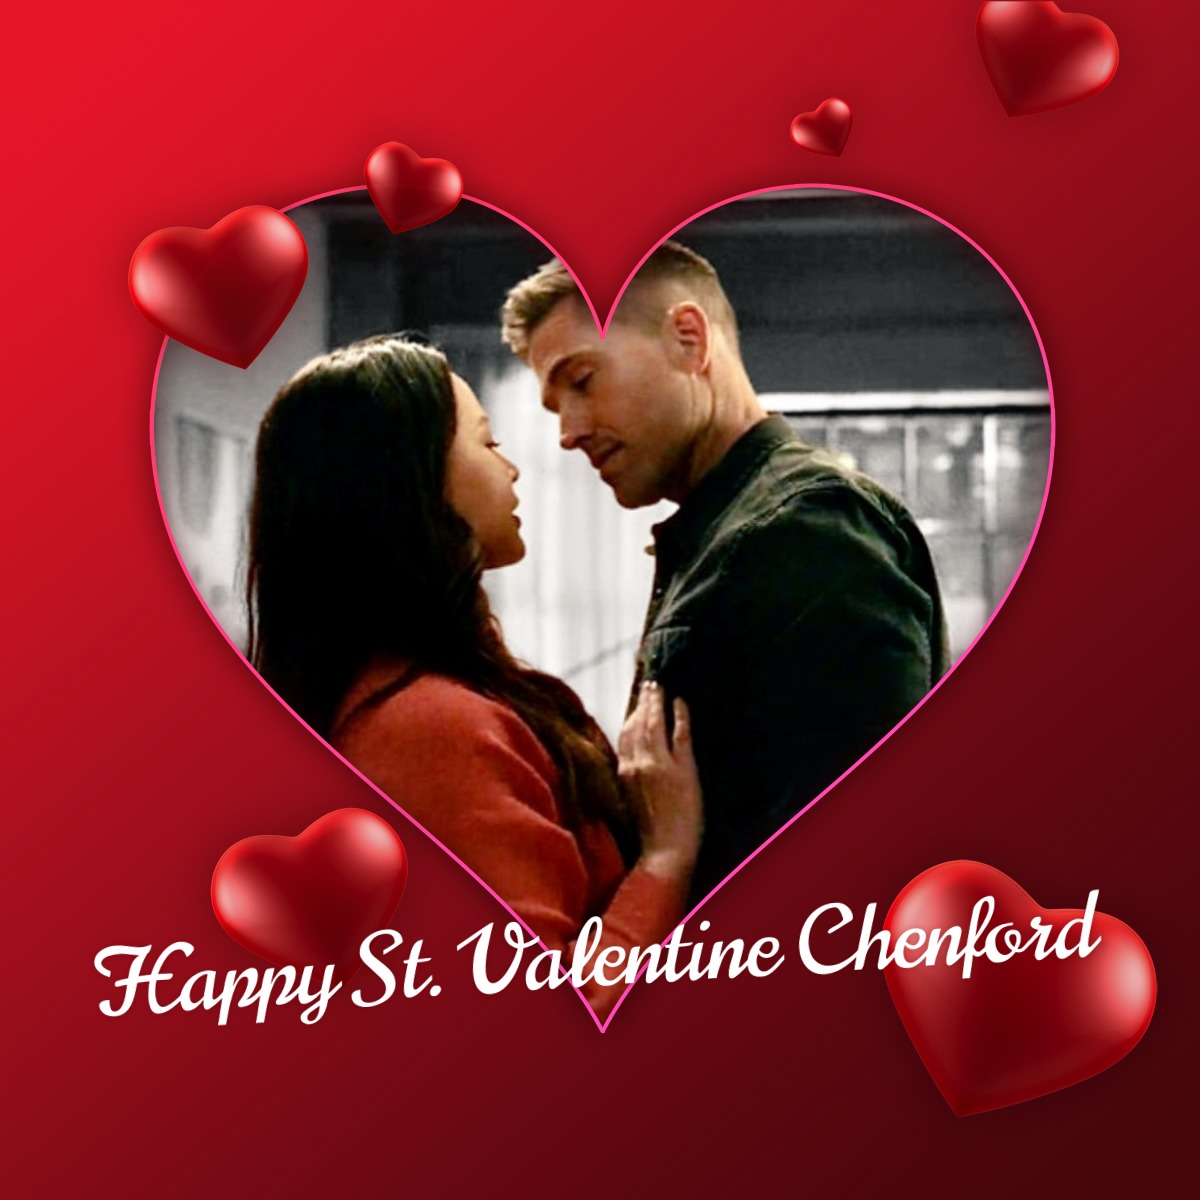 Happy #TheRookie day & #StValentine day #Chenford fans #TimBradford #LucyChen ❤️